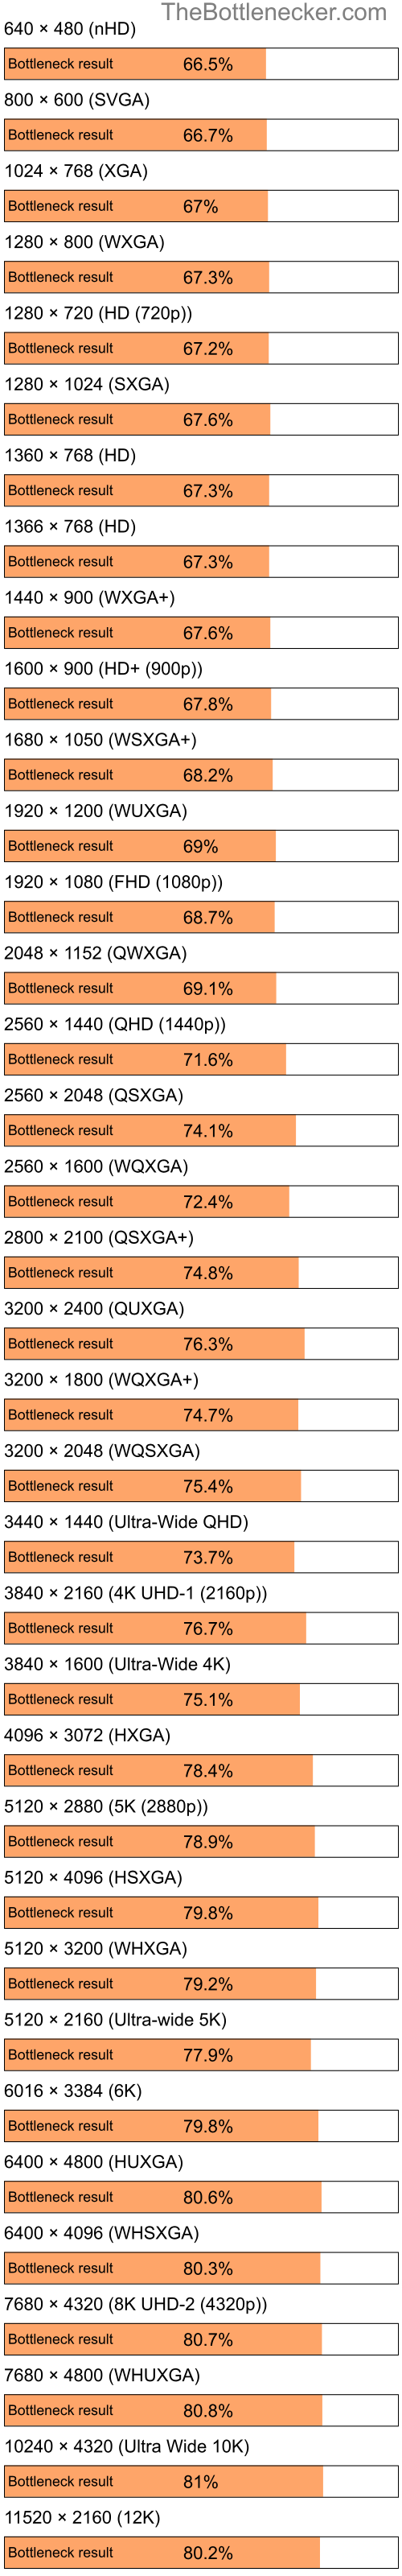 Bottleneck results by resolution for Intel Celeron and NVIDIA GeForce GT 320M in Graphic Card Intense Tasks